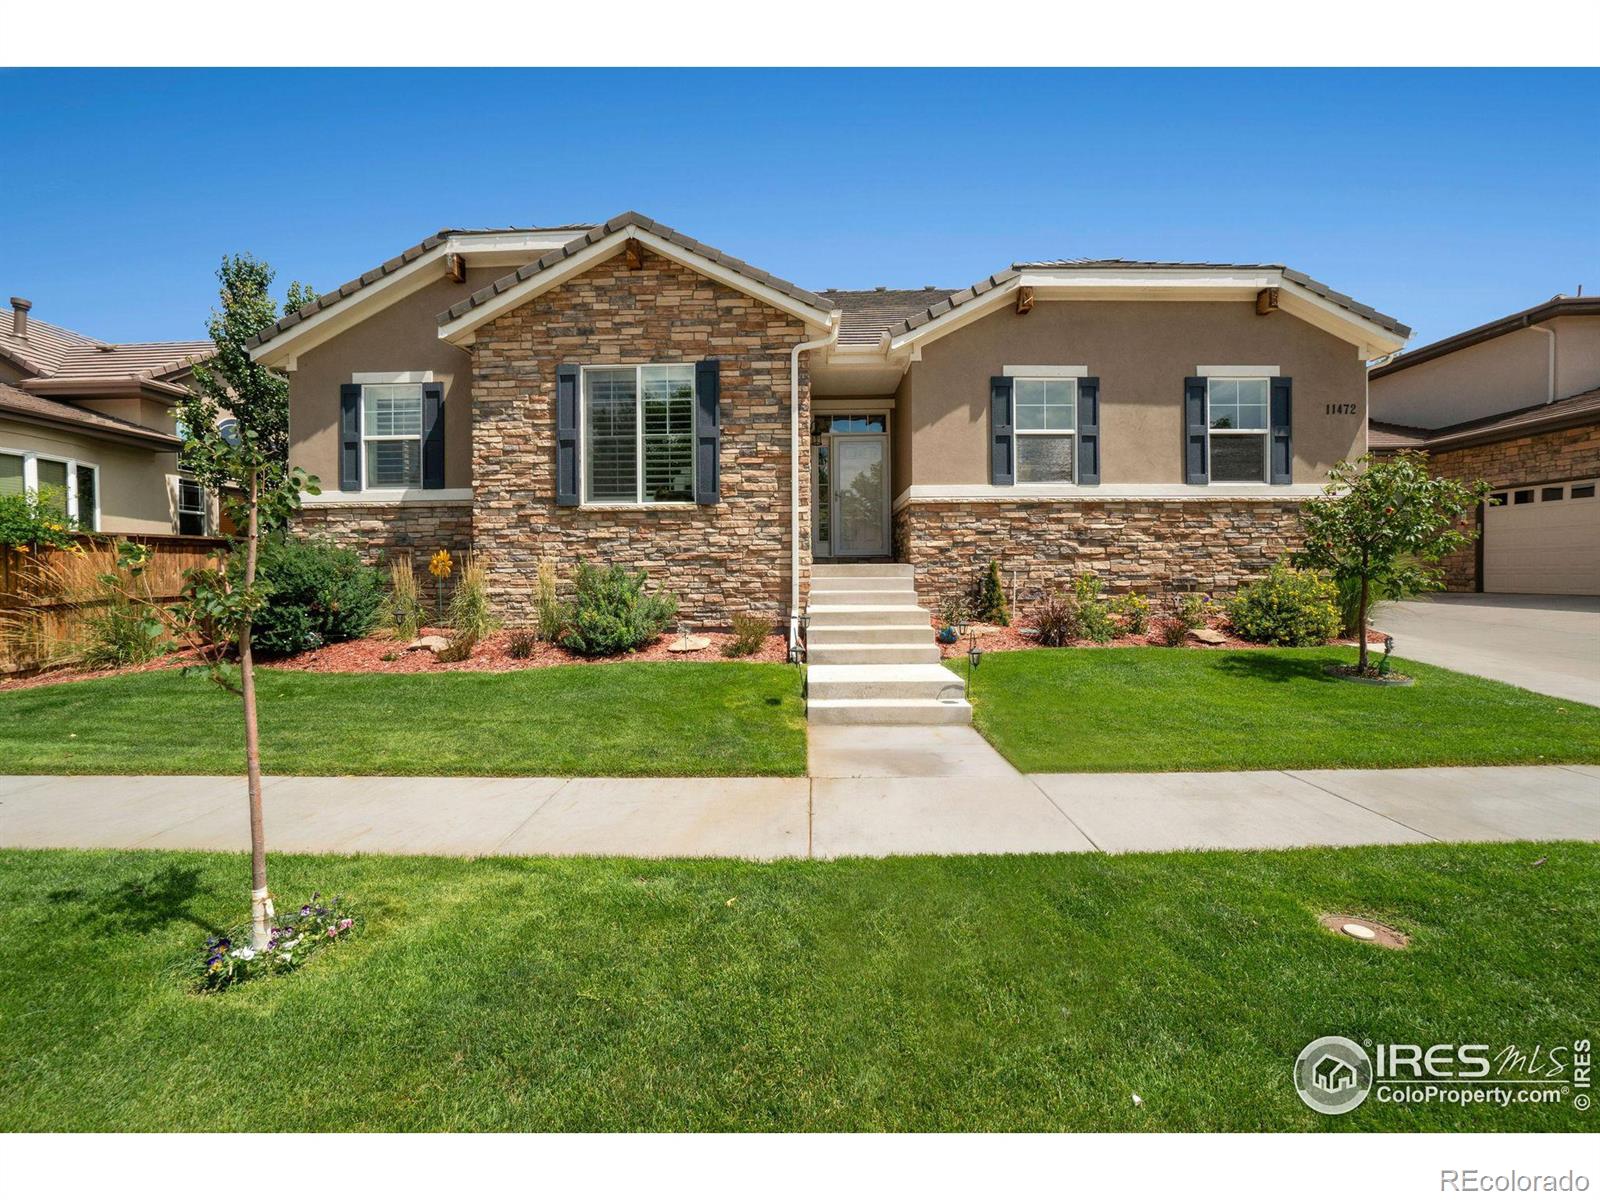 11472  Chambers Drive, commerce city MLS: 123456789994203 Beds: 5 Baths: 3 Price: $680,000